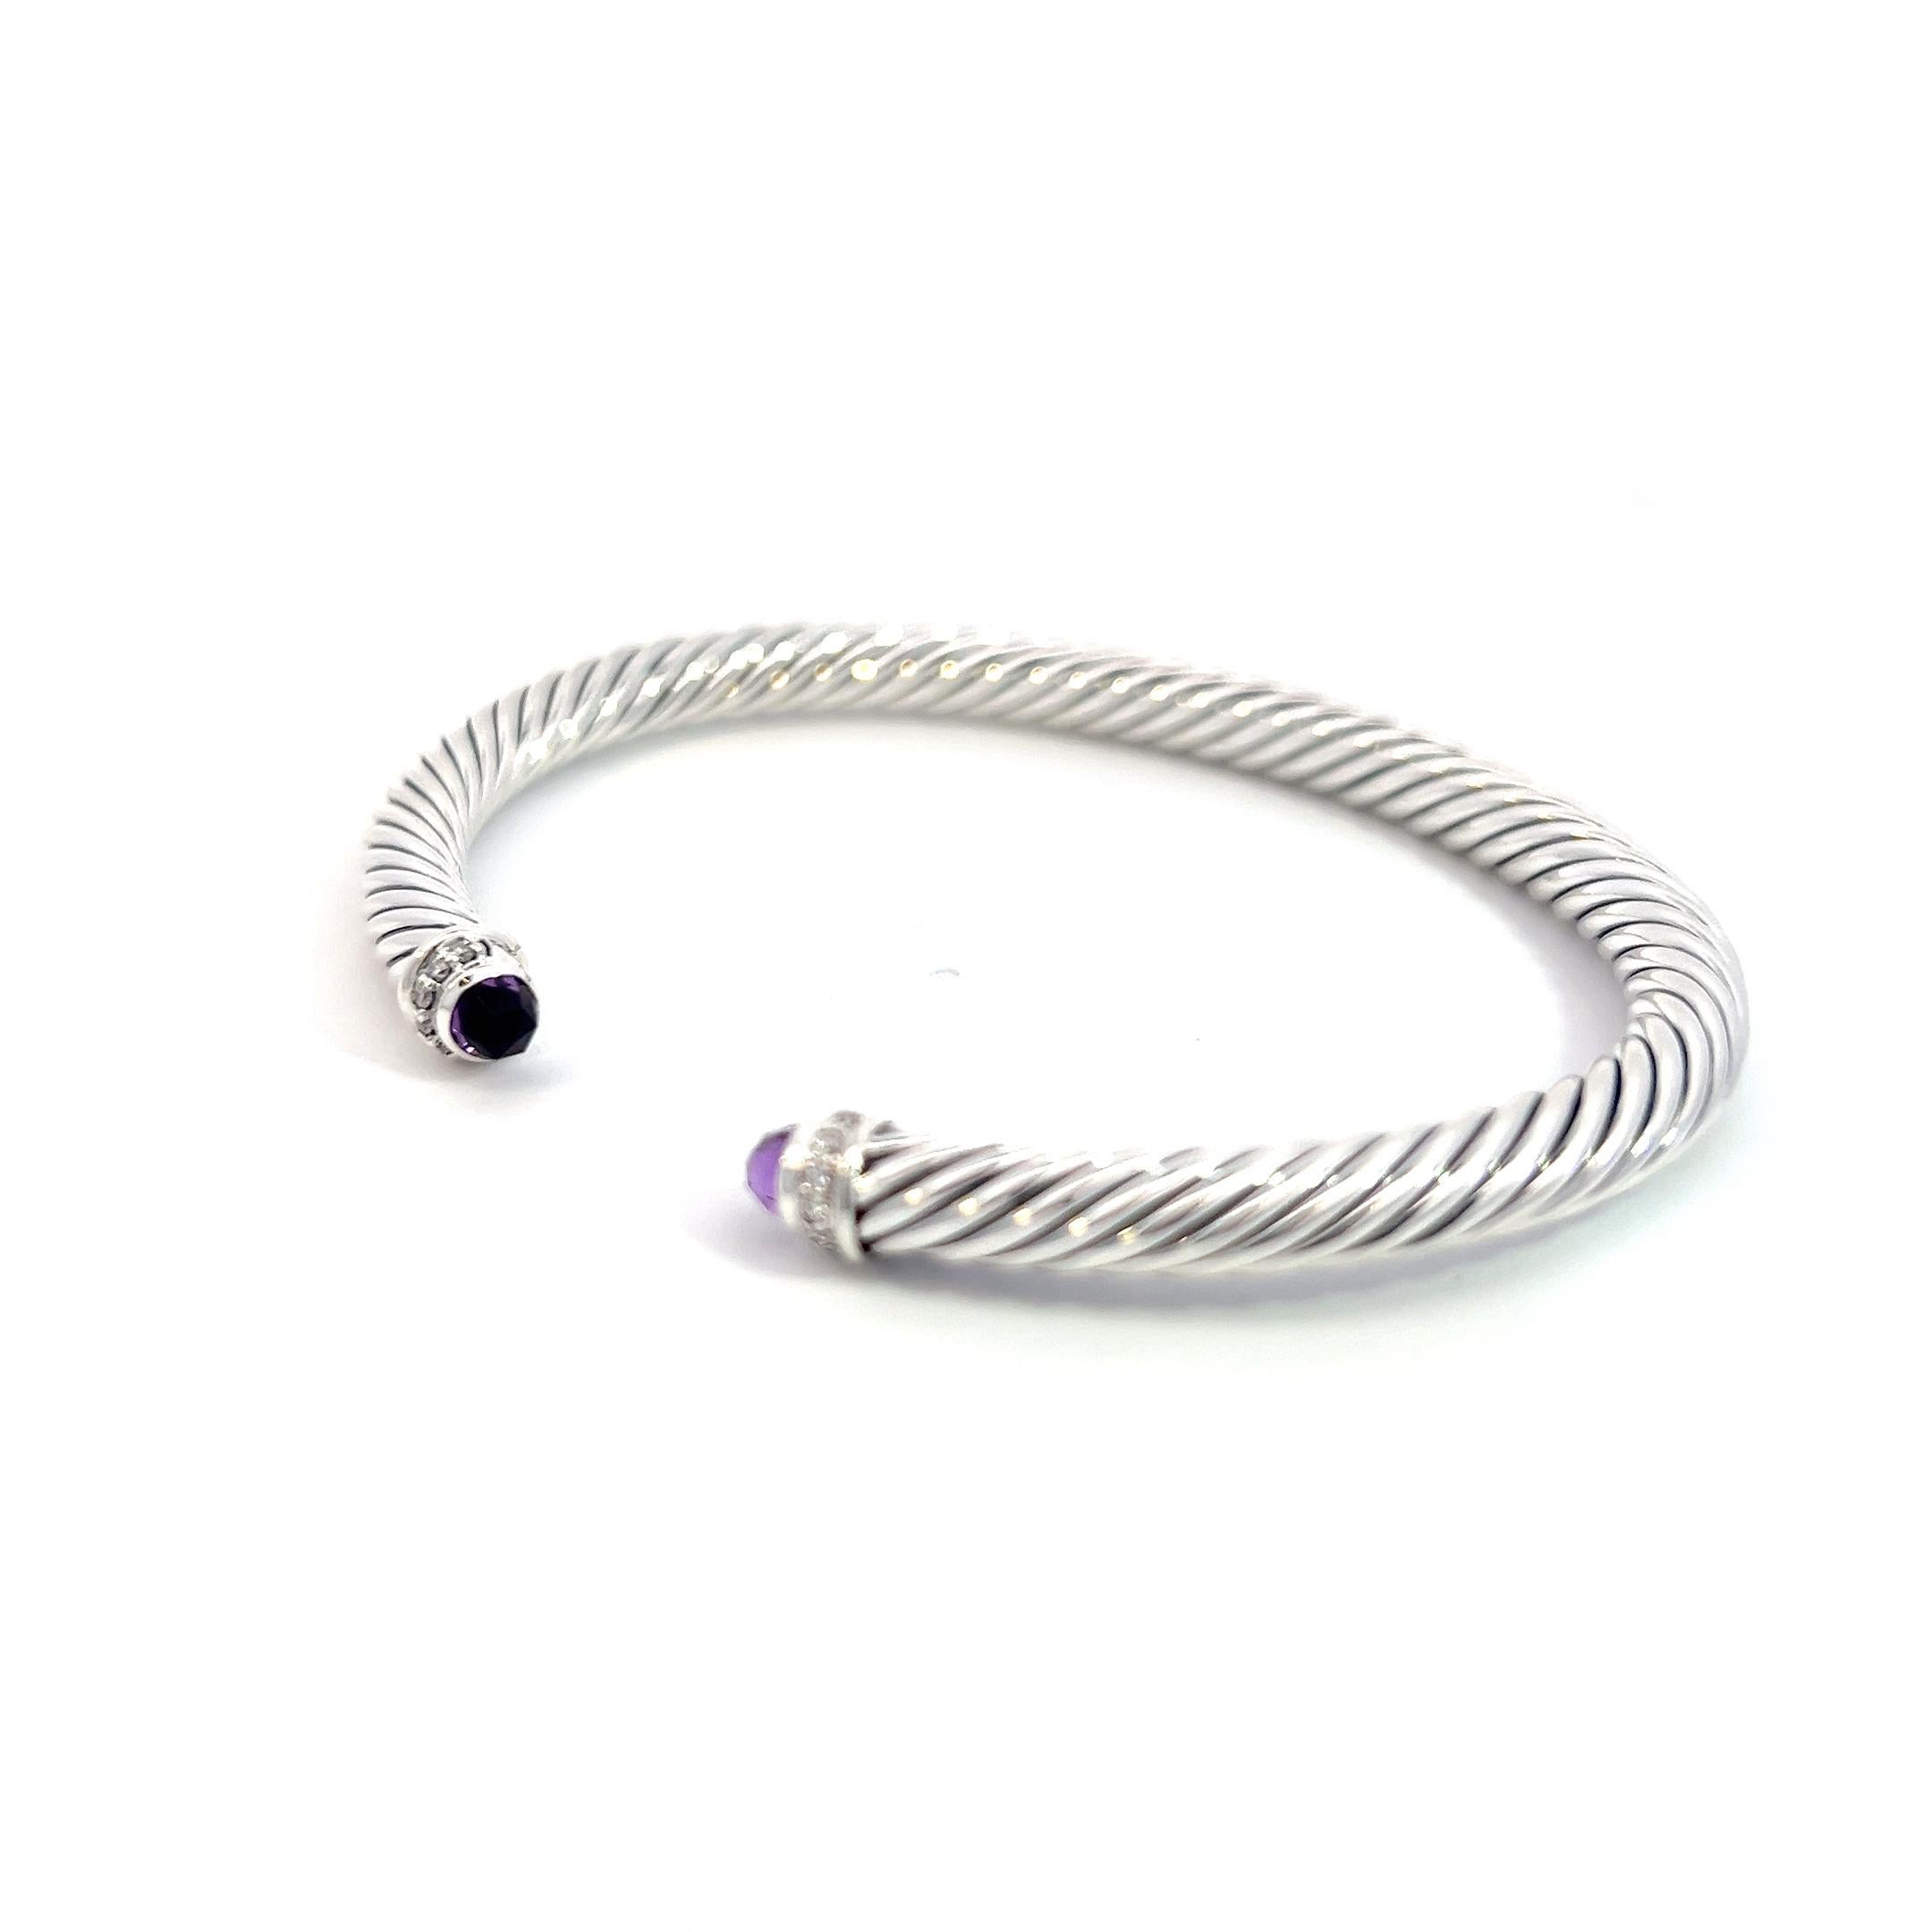 Authentic David Yurman Estate Diamond Amethyst Cable Classic 5 mm Bracelet Sil 0.27 Ct DY319

Retail: $795

This elegant Authentic David Yurman bracelet is made of sterling silver.

TRUSTED SELLER SINCE 2002

PLEASE SEE OUR HUNDREDS OF POSITIVE